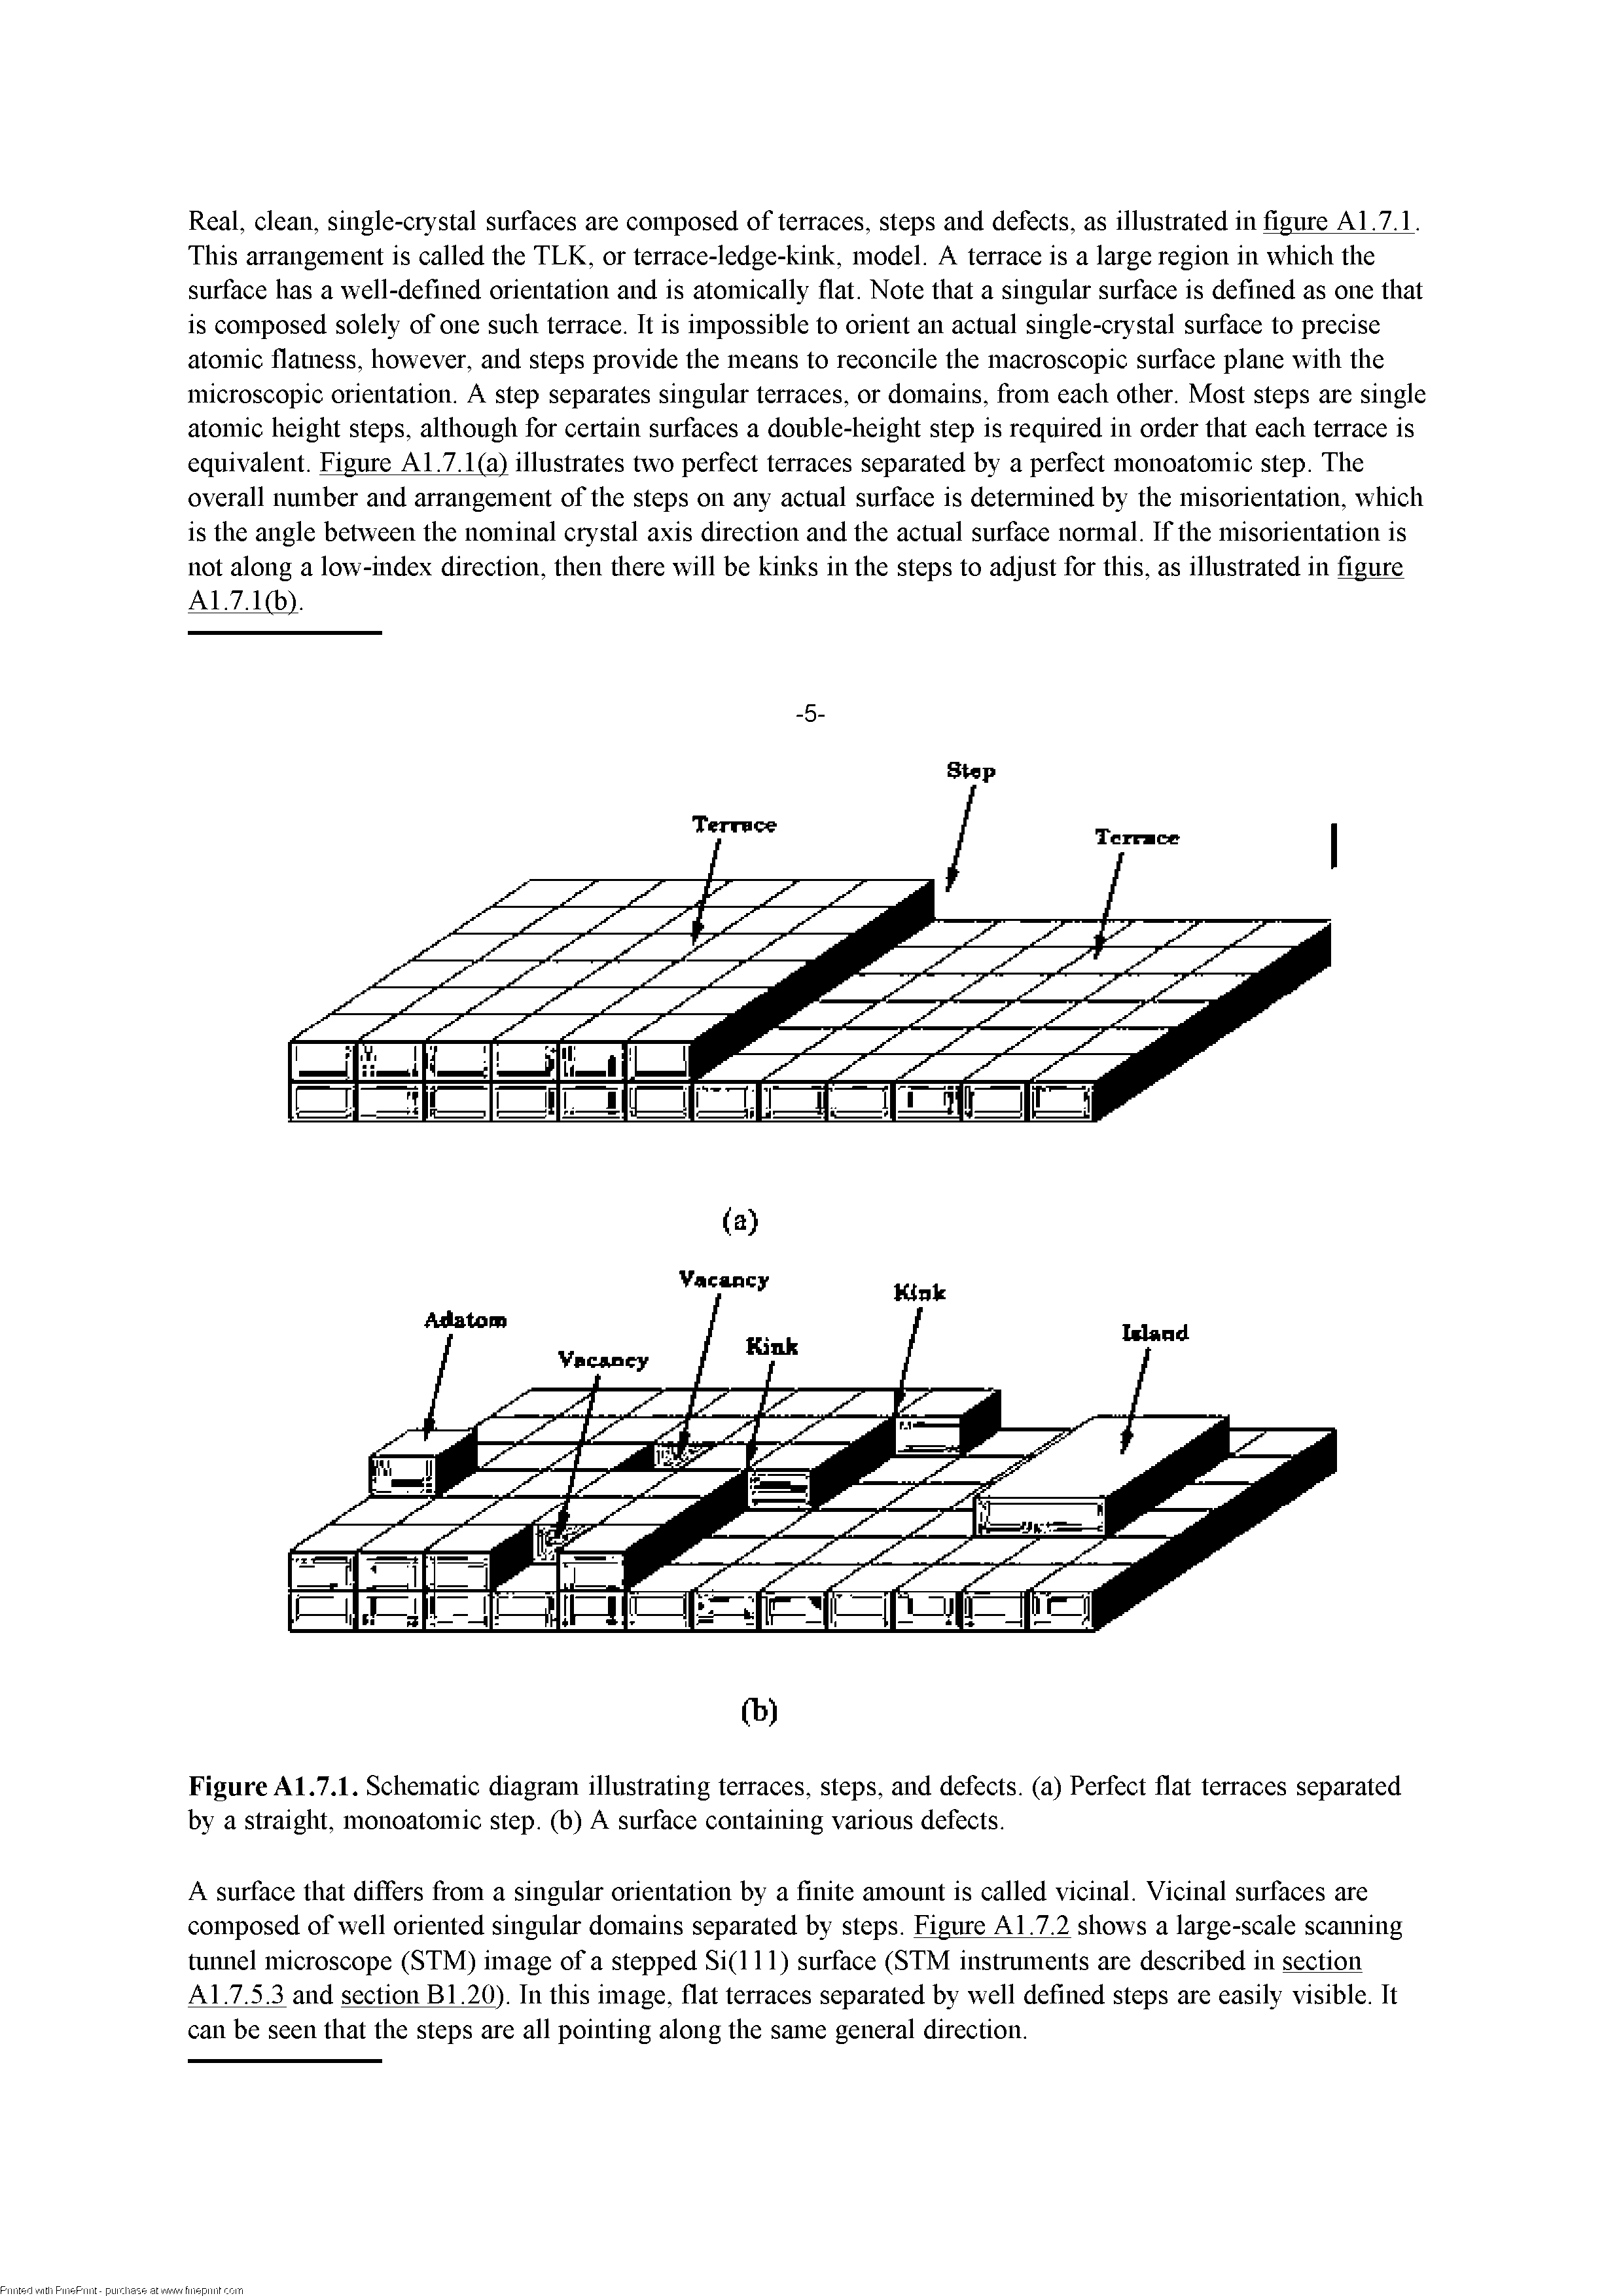 Figure Al.7.1. Schematic diagram illustrating terraces, steps, and defects, (a) Perfect flat terraces separated by a straight, monoatomic step, (b) A surface containing various defects.